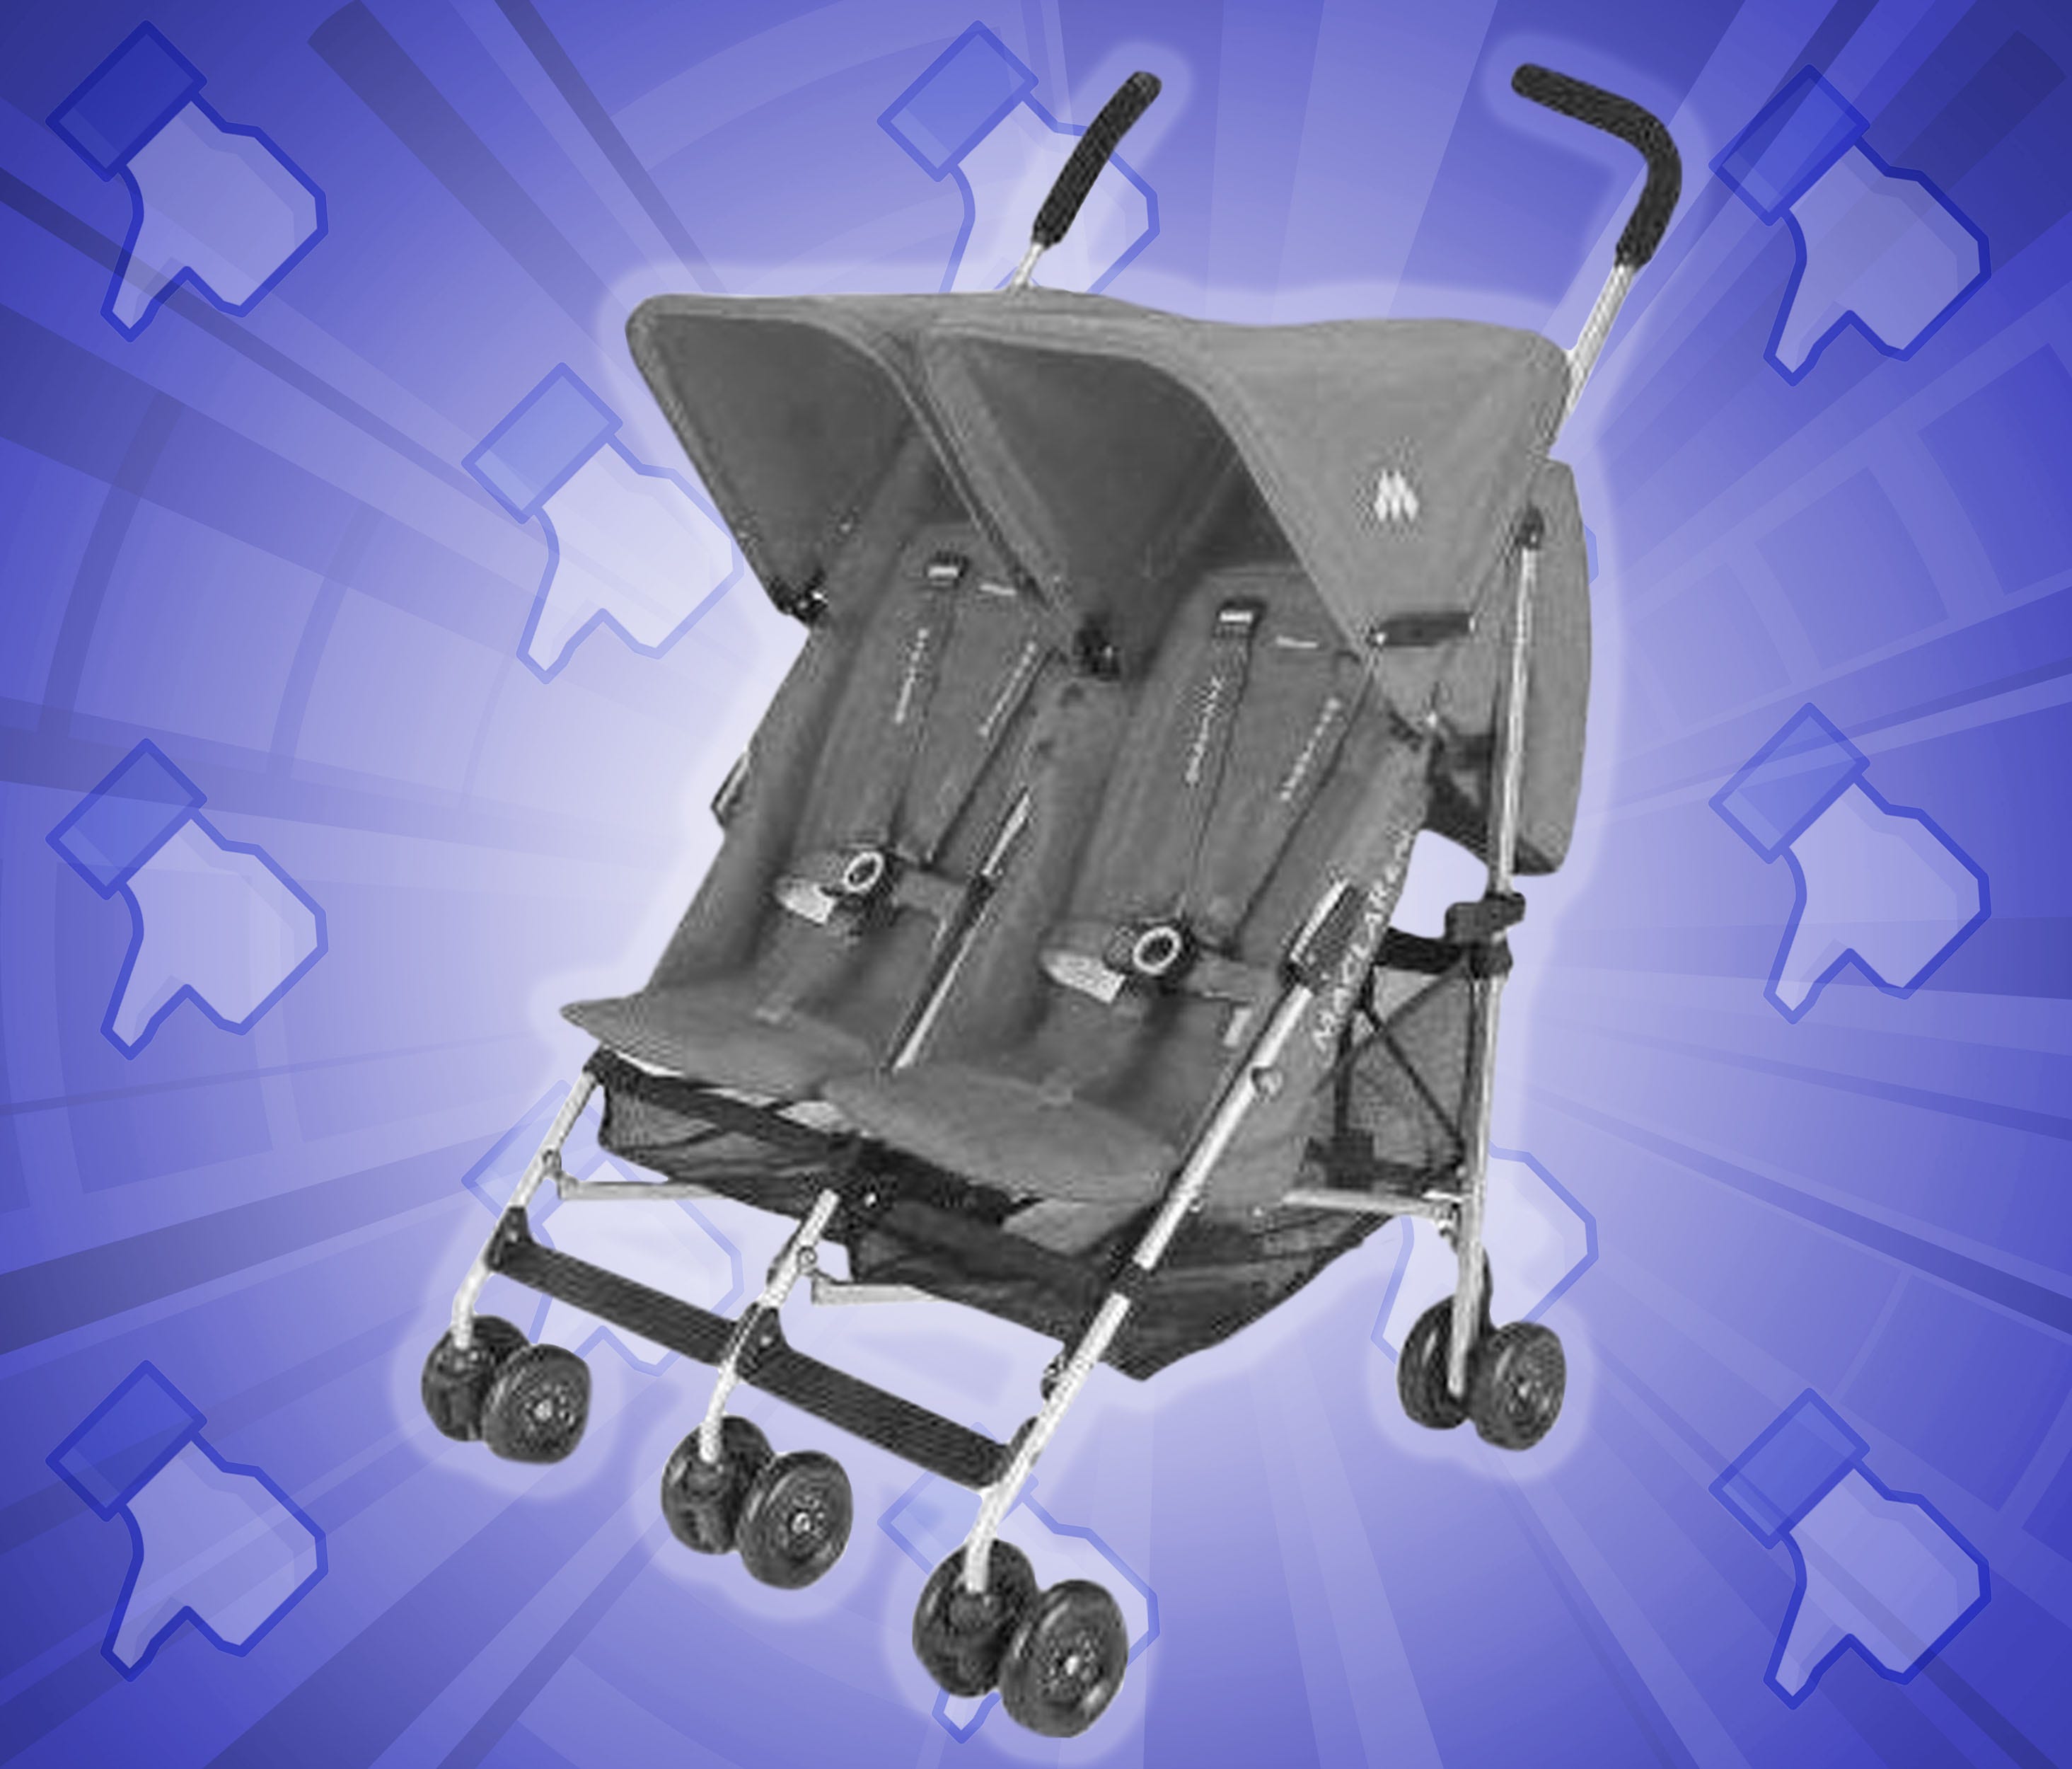 Maclaren strollers were recalled in 2009 after the company learned children were getting their fingers sliced in a faulty hinge. The hinge has since been redesigned. Source: USA TODAY illustration